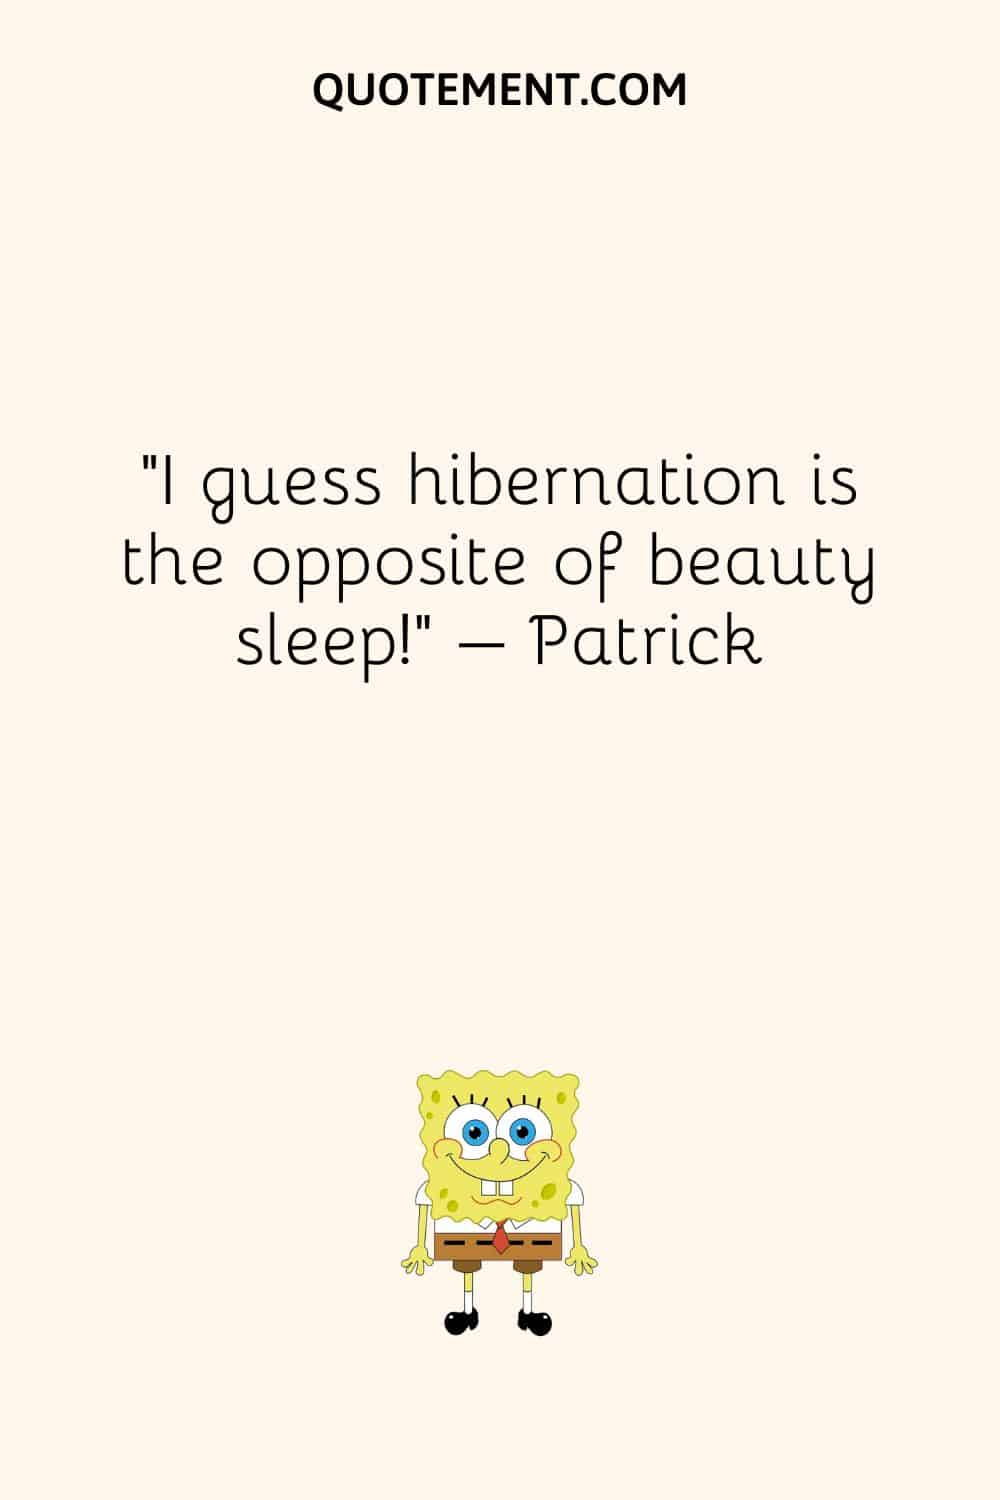 “I guess hibernation is the opposite of beauty sleep!” – Patrick